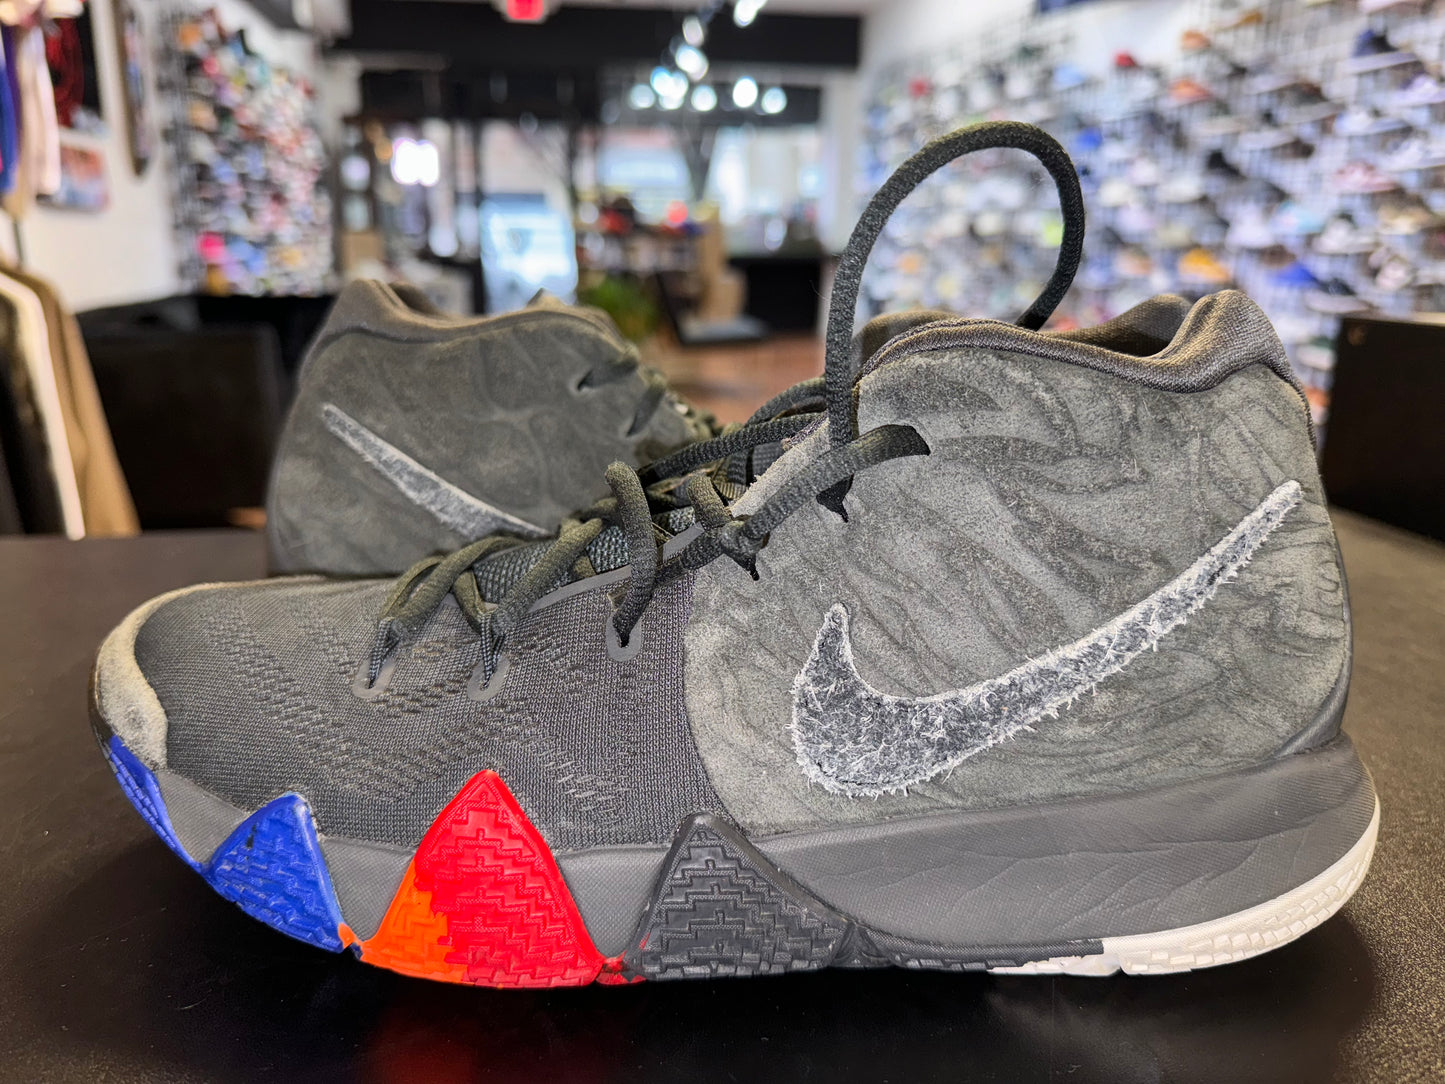 Size 10 Nike Kyrie 4 “Year of The Monkey" (MAMO)